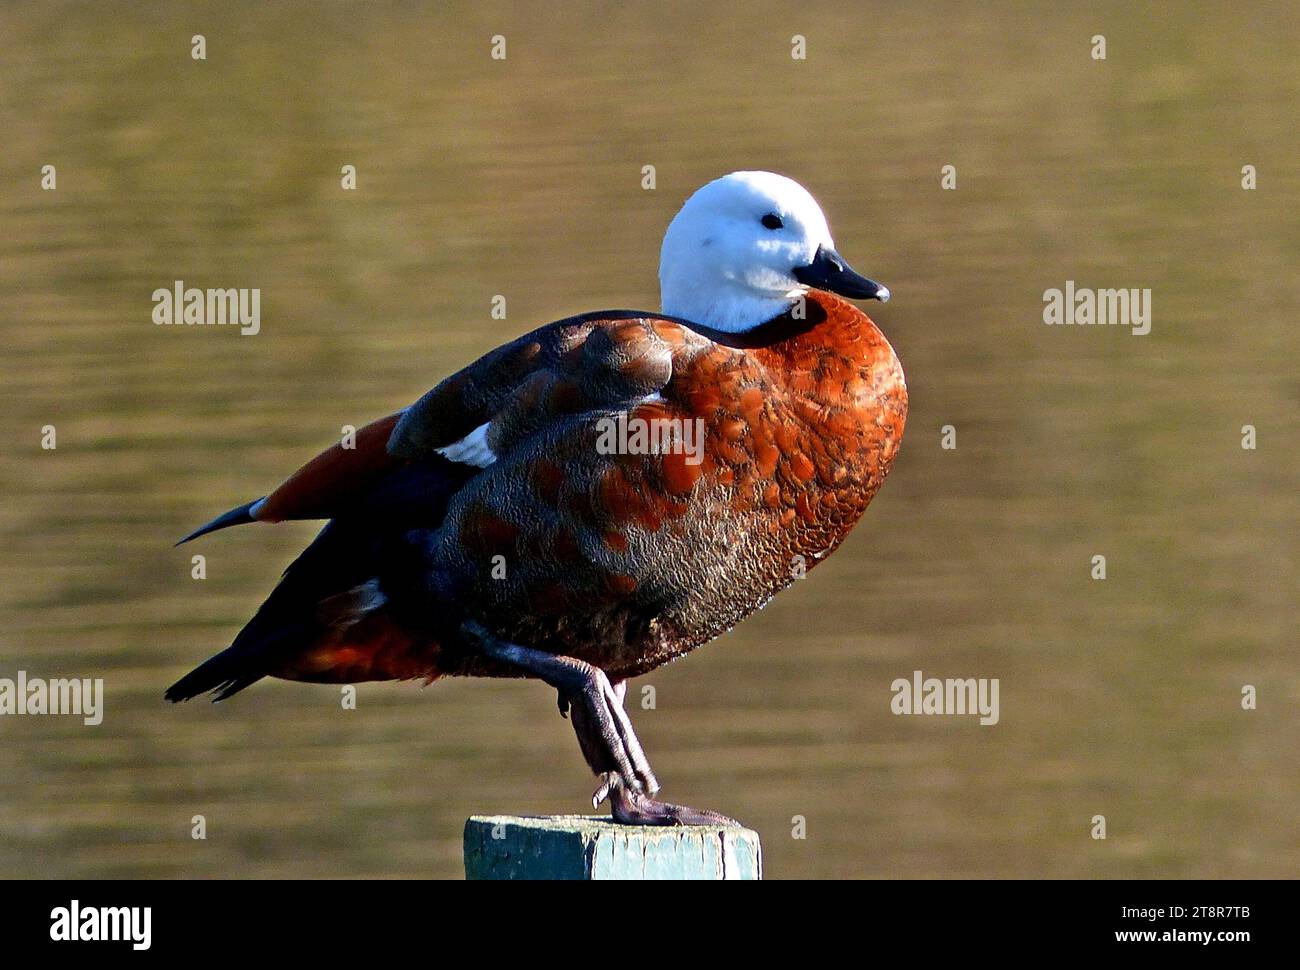 Female Shell Duck. NZ, Unusually for ducks, the female paradise shelduck is more eye-catching than the male; females have a pure white head and chestnut-coloured body, while males have a dark grey body and black head Stock Photo